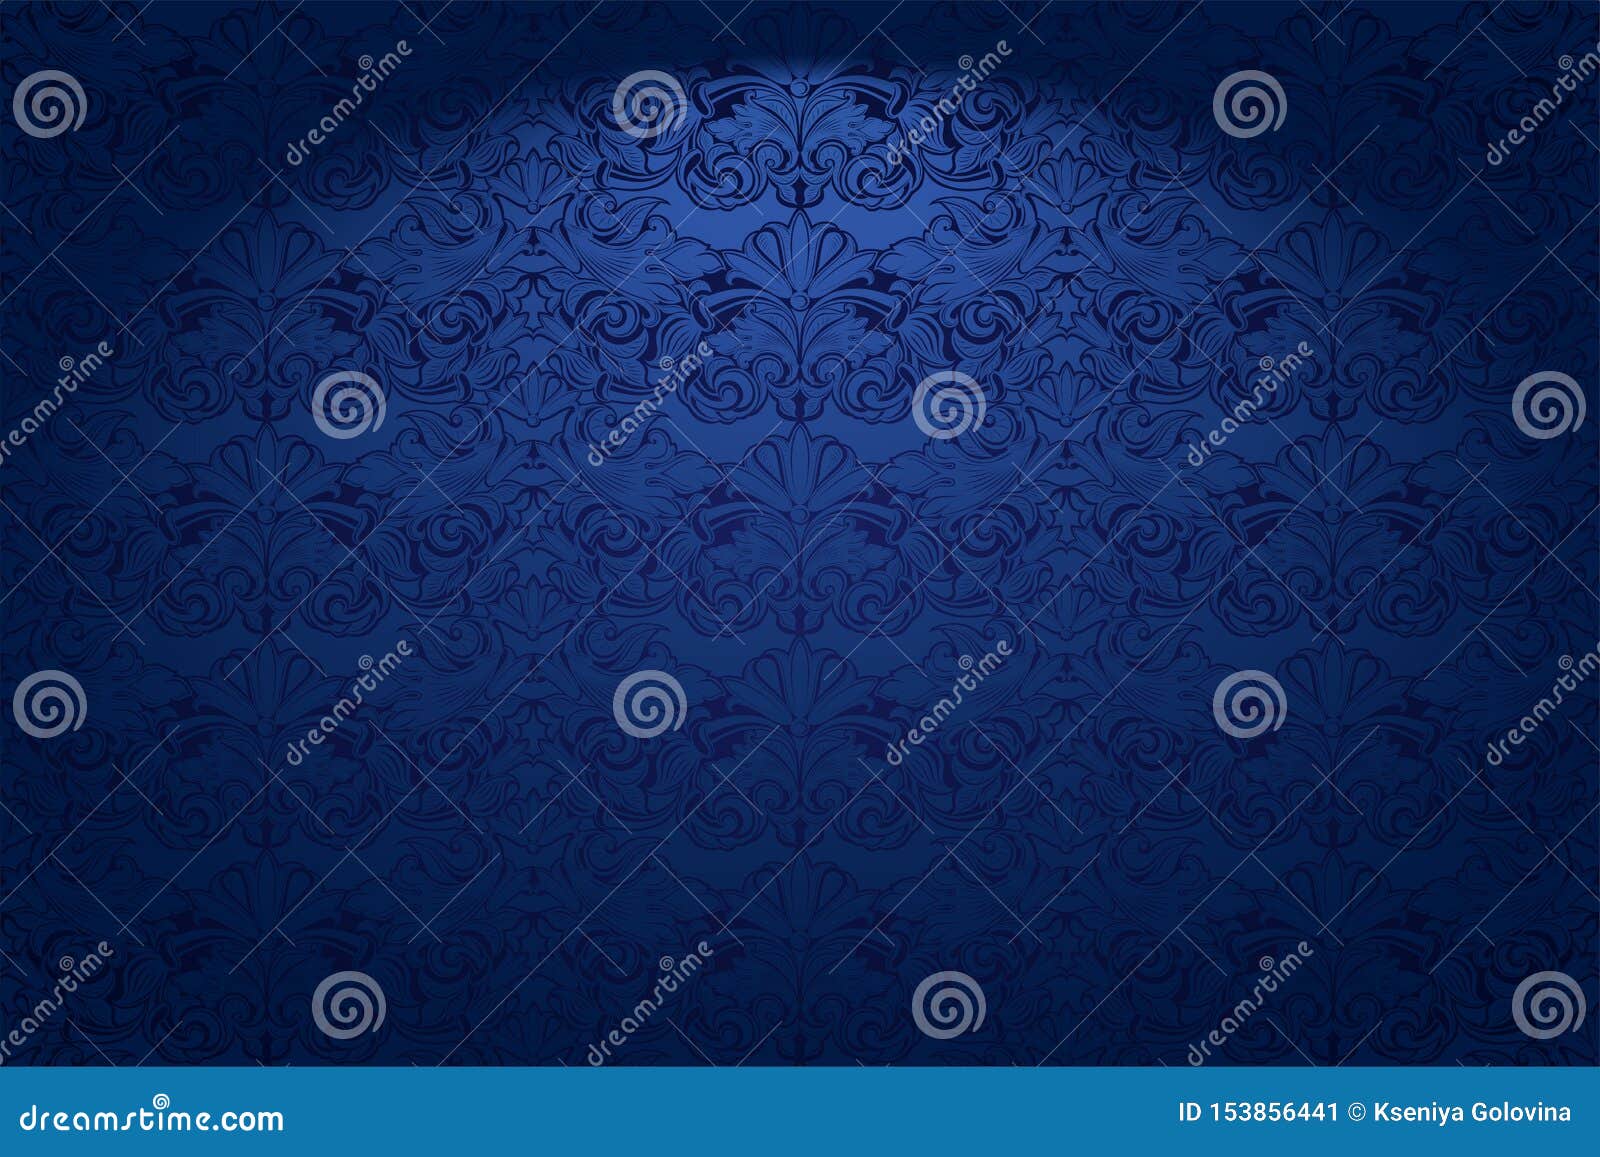 royal, vintage, gothic horizontal background in dark blue ultramarine with a classic baroque pattern, rococo